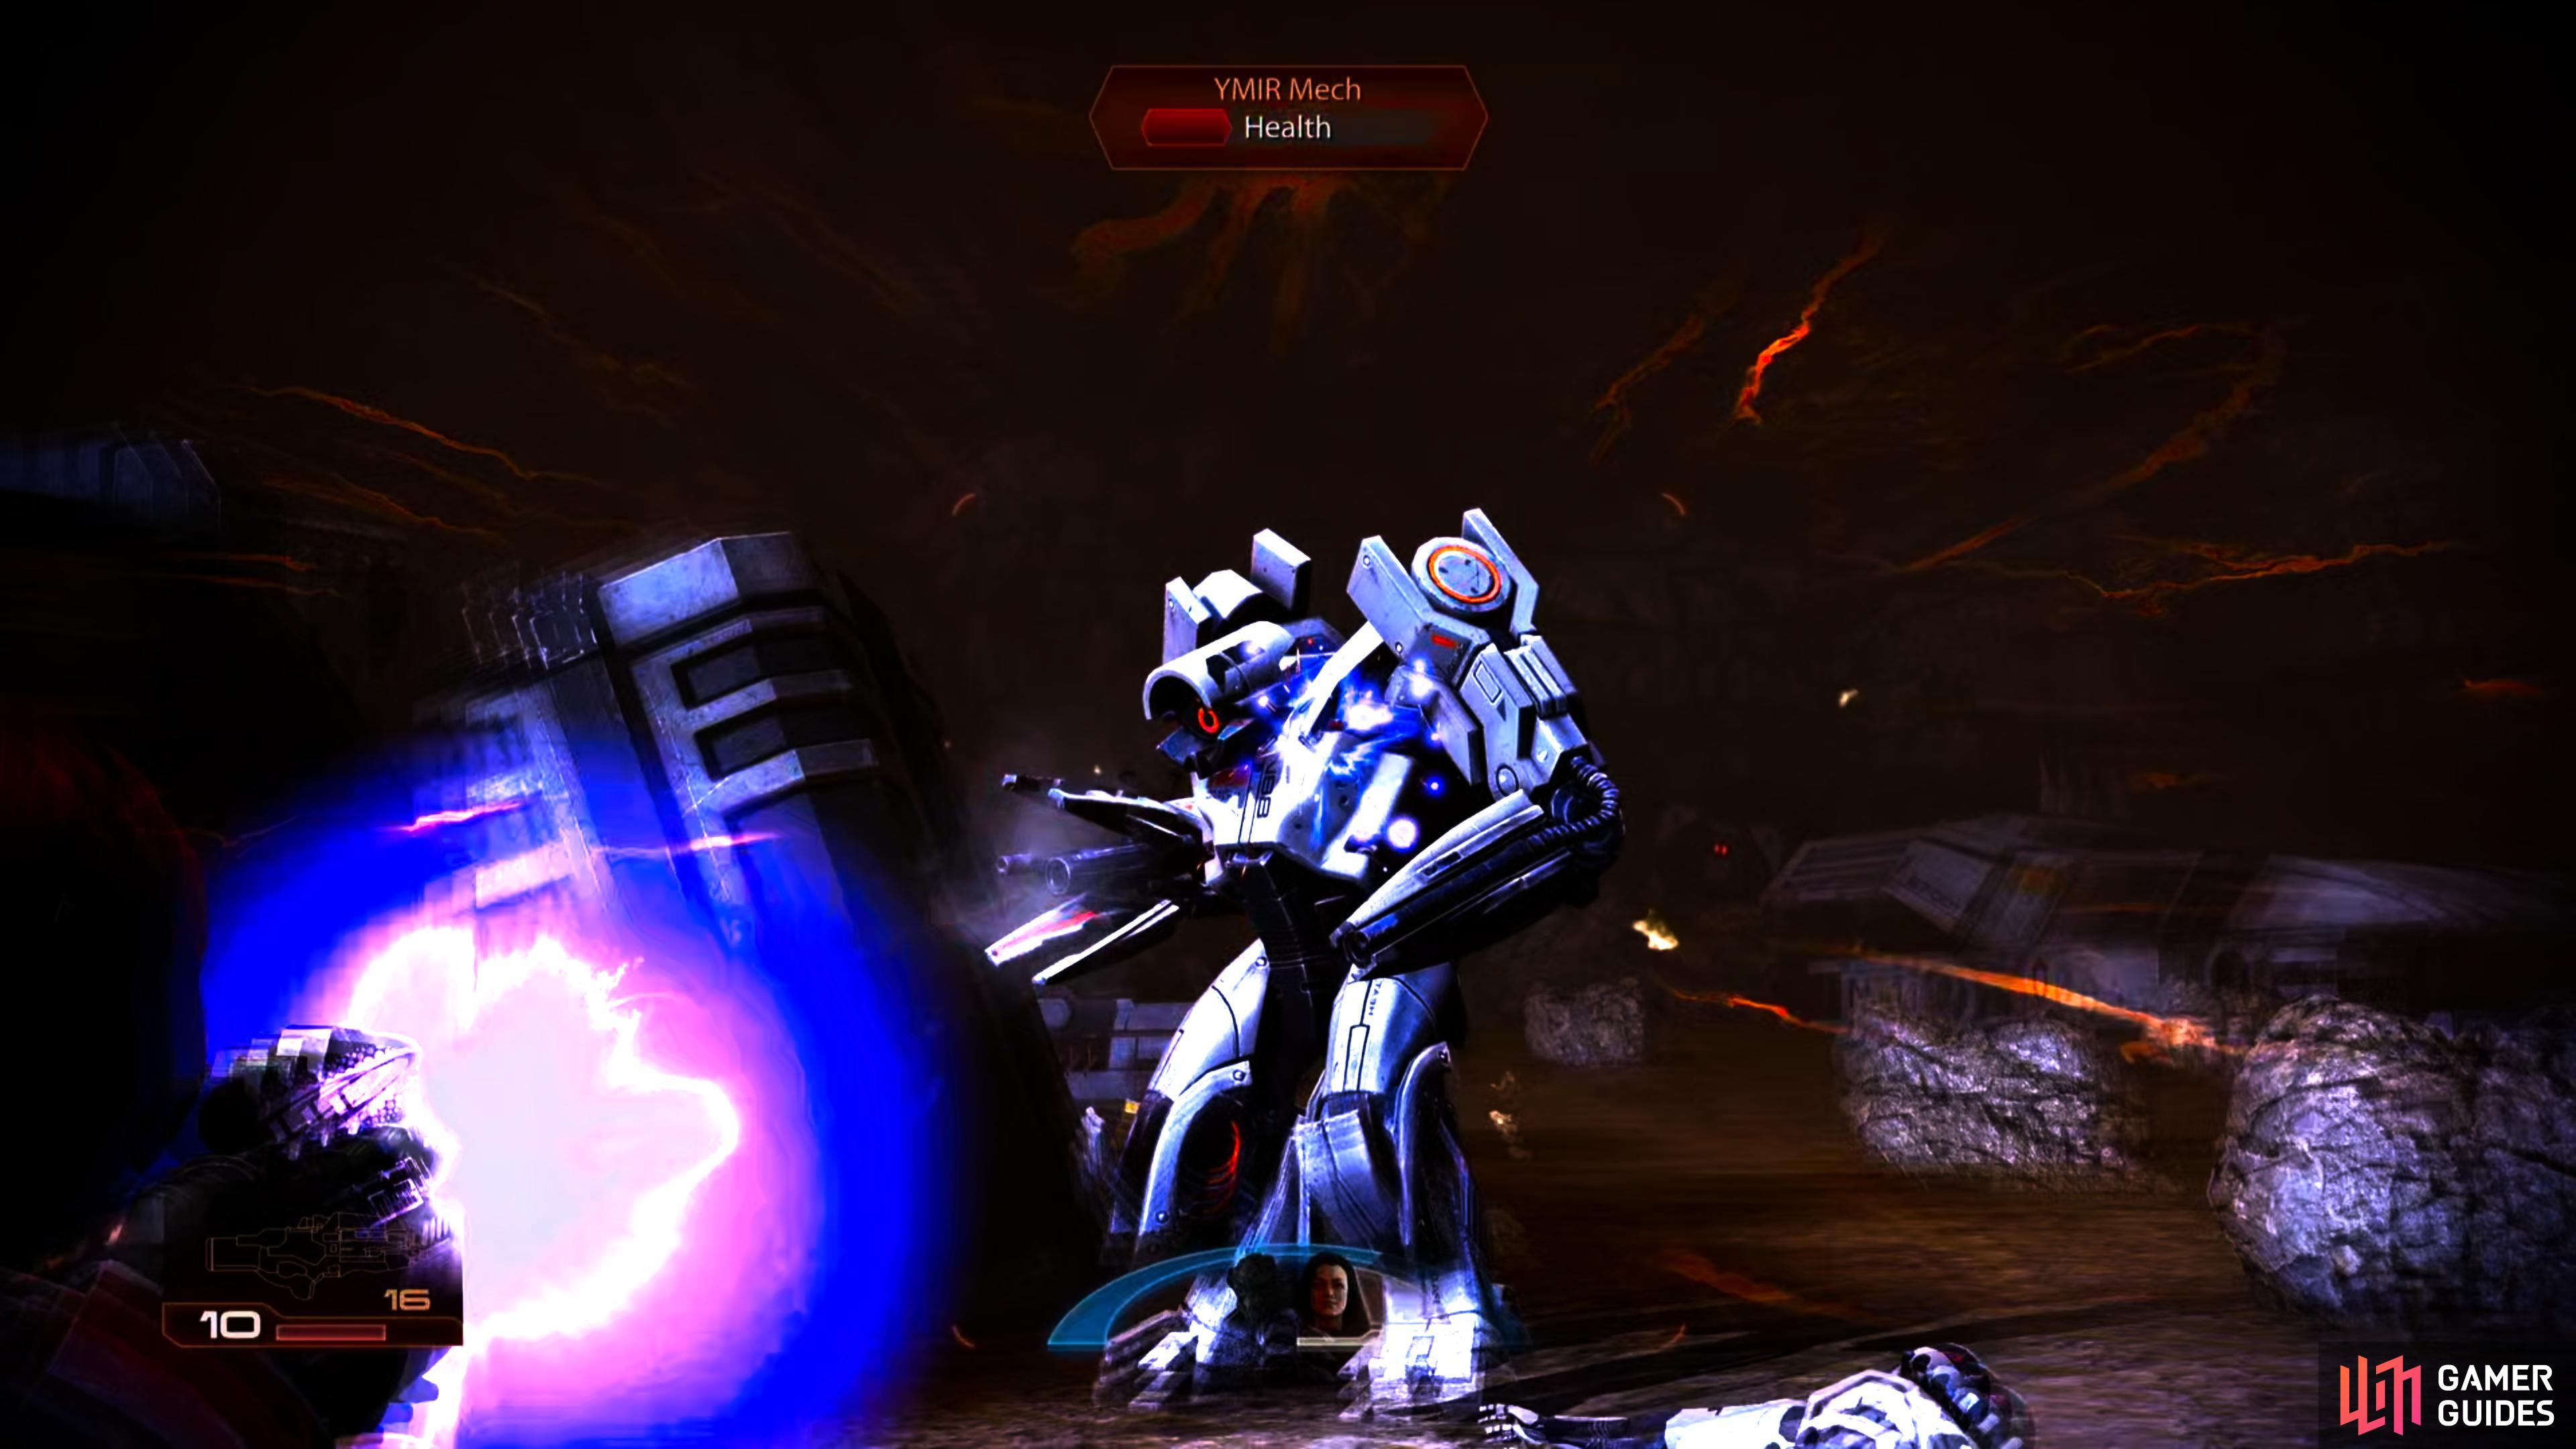 Fight back towards your shuttle, stopping to put down a YMIR Mech.